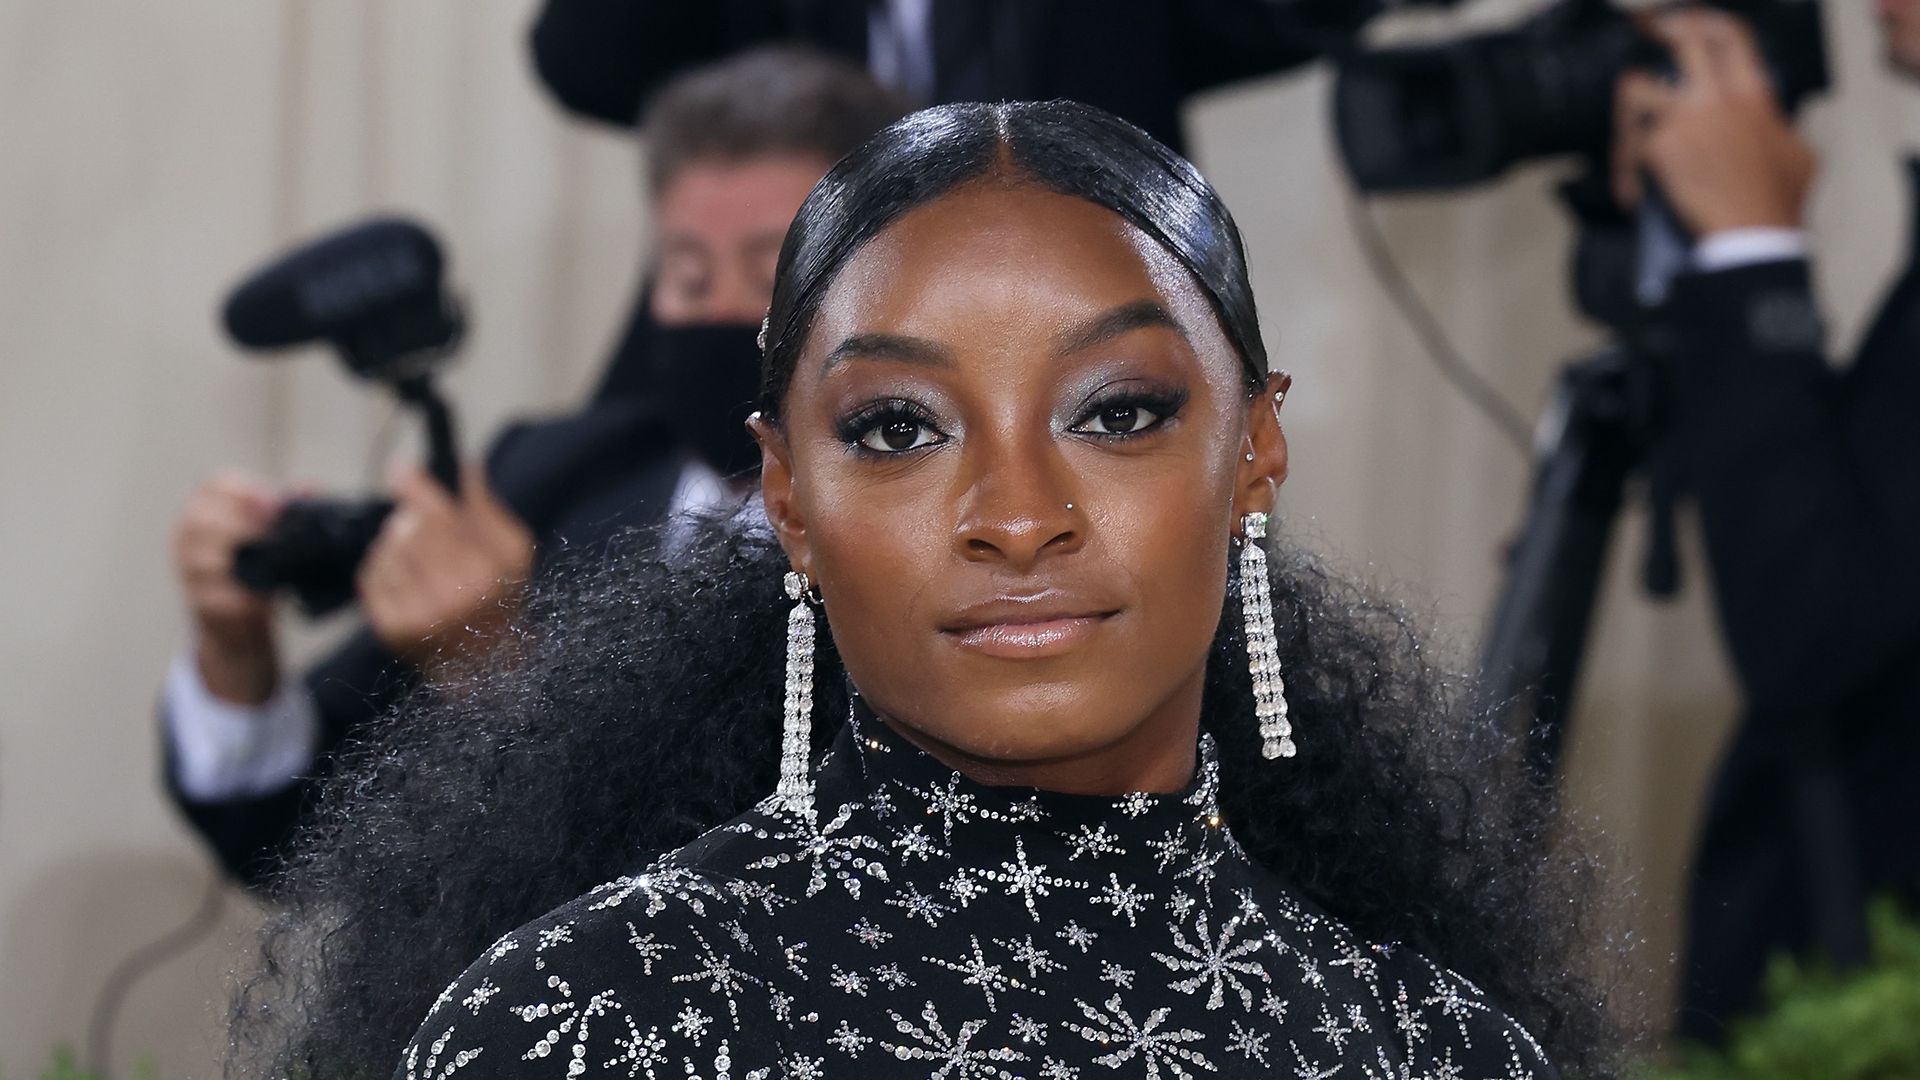 Simone Biles attends the 2021 Met Gala benefit "In America: A Lexicon of Fashion" at Metropolitan Museum of Art on September 13, 2021 in New York City.